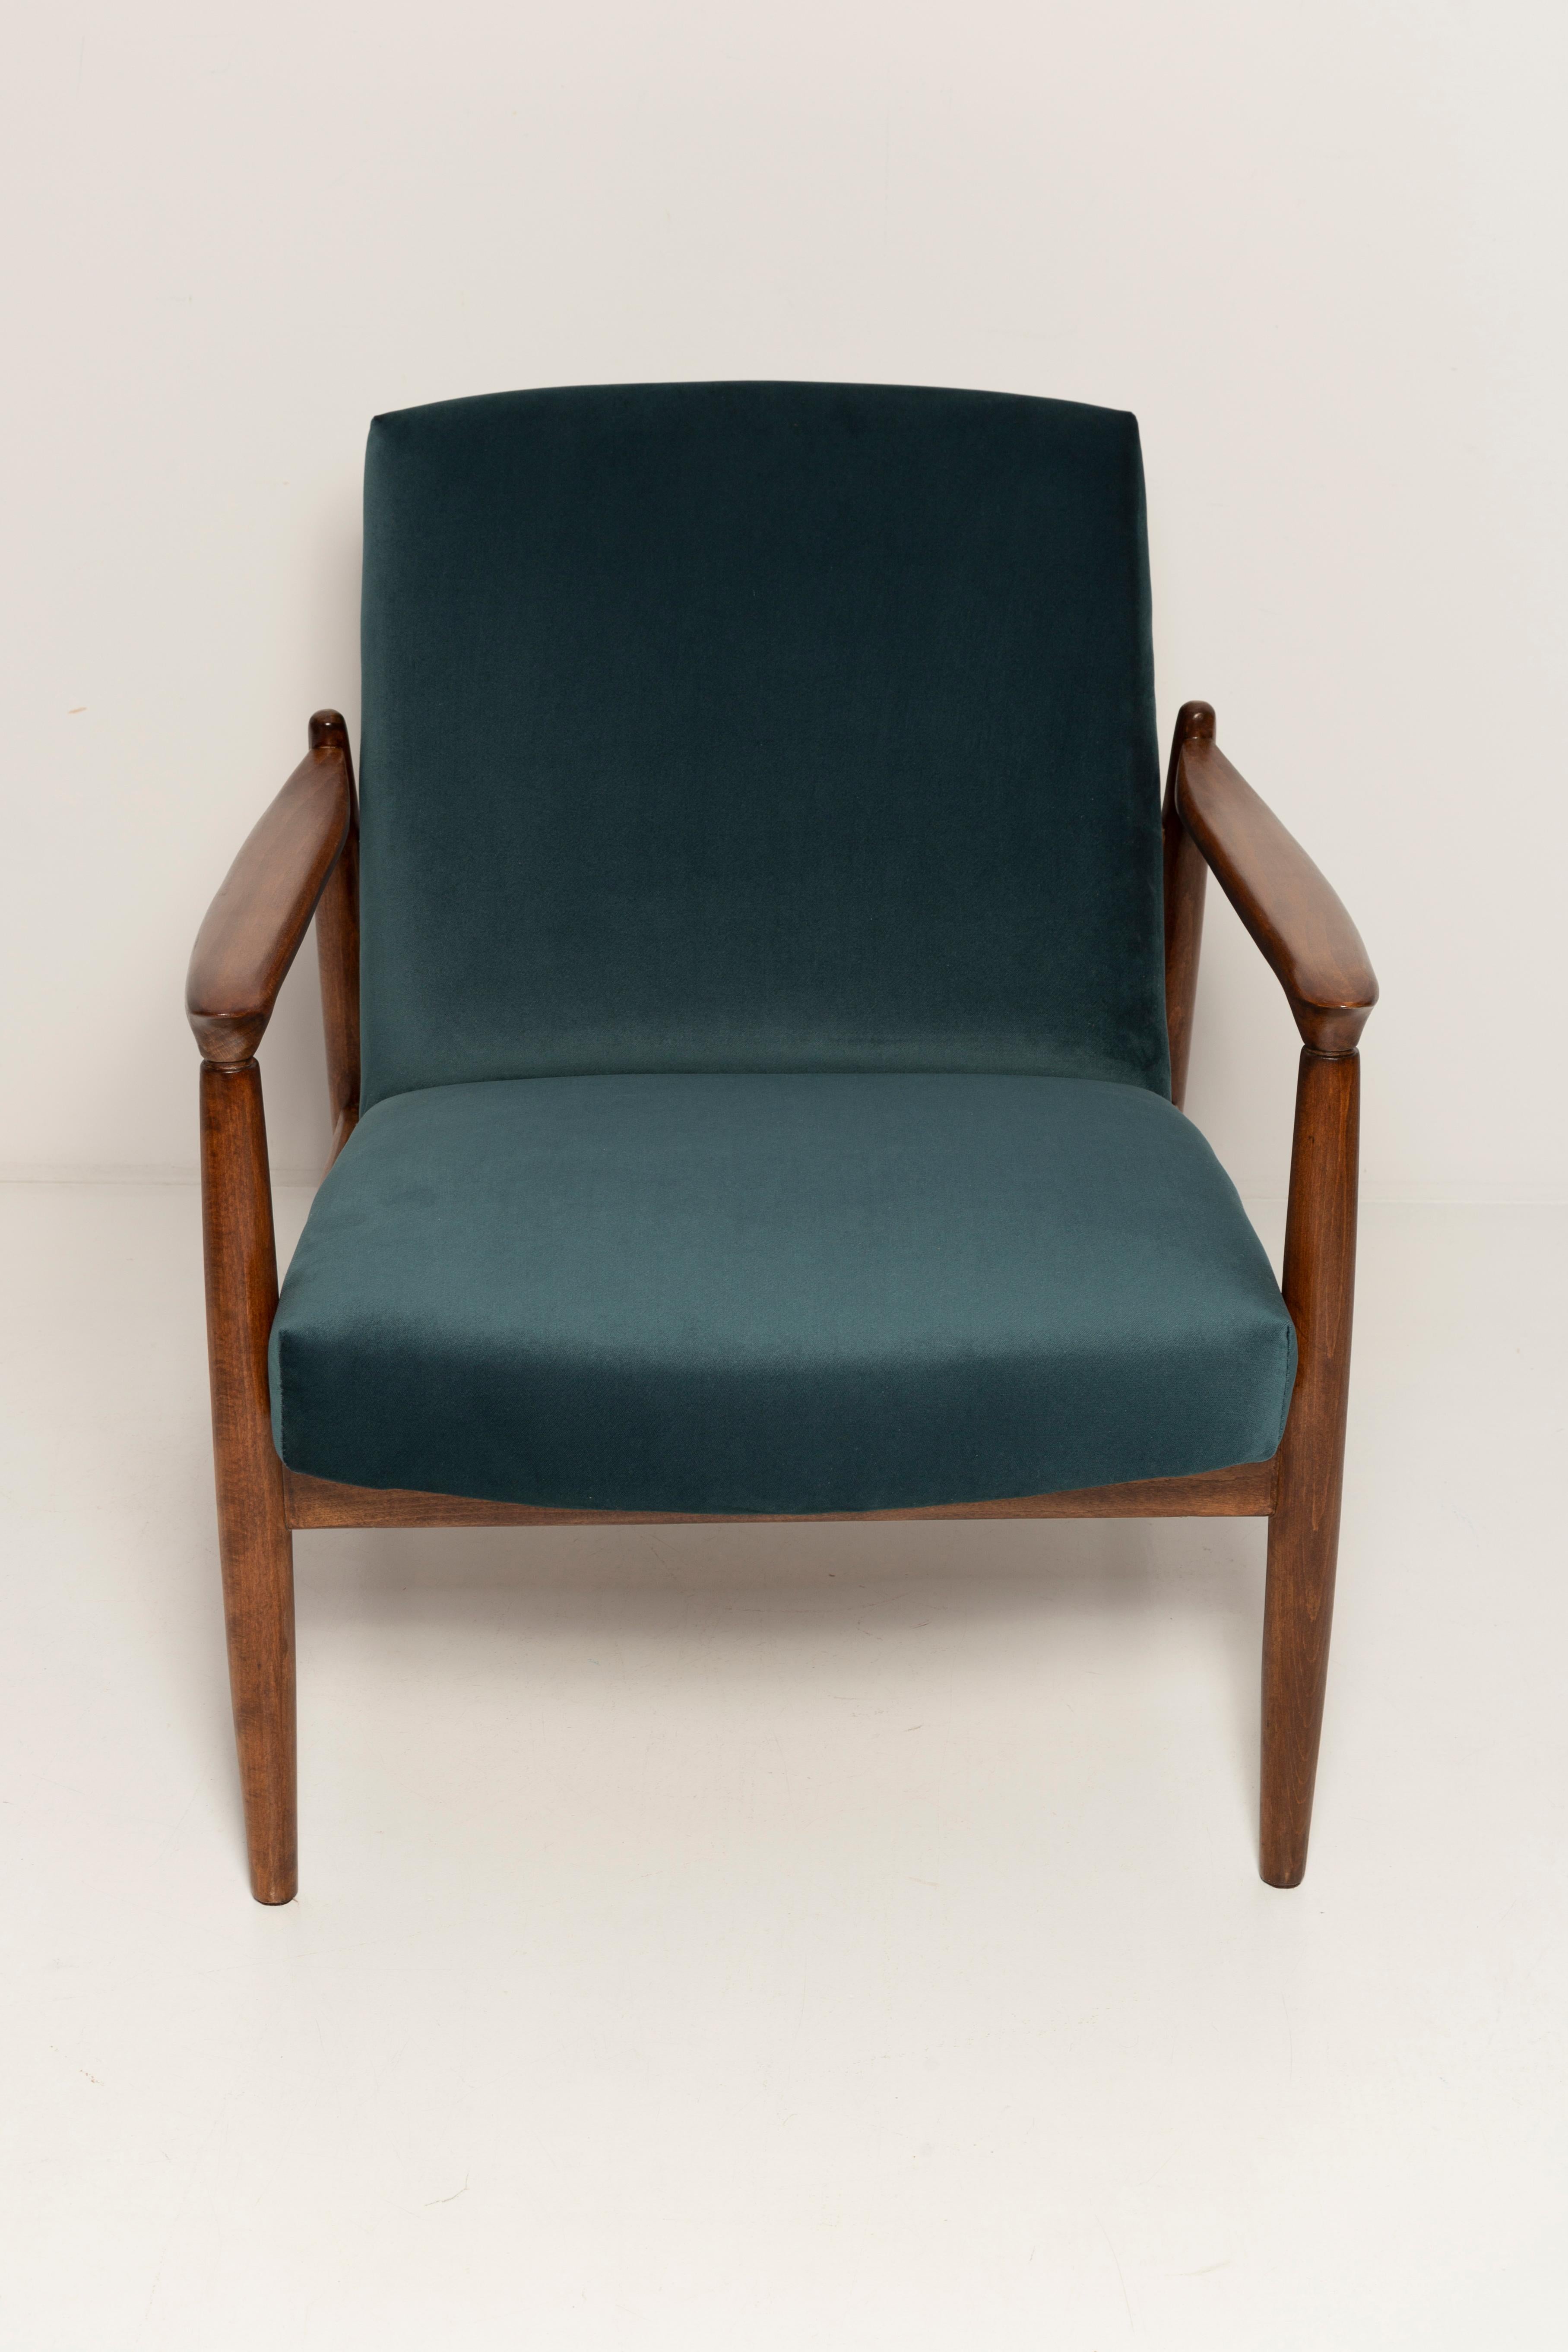 Set of Petrol Blue Vintage Armchair and Stool, Edmund Homa, 1960s For Sale 1